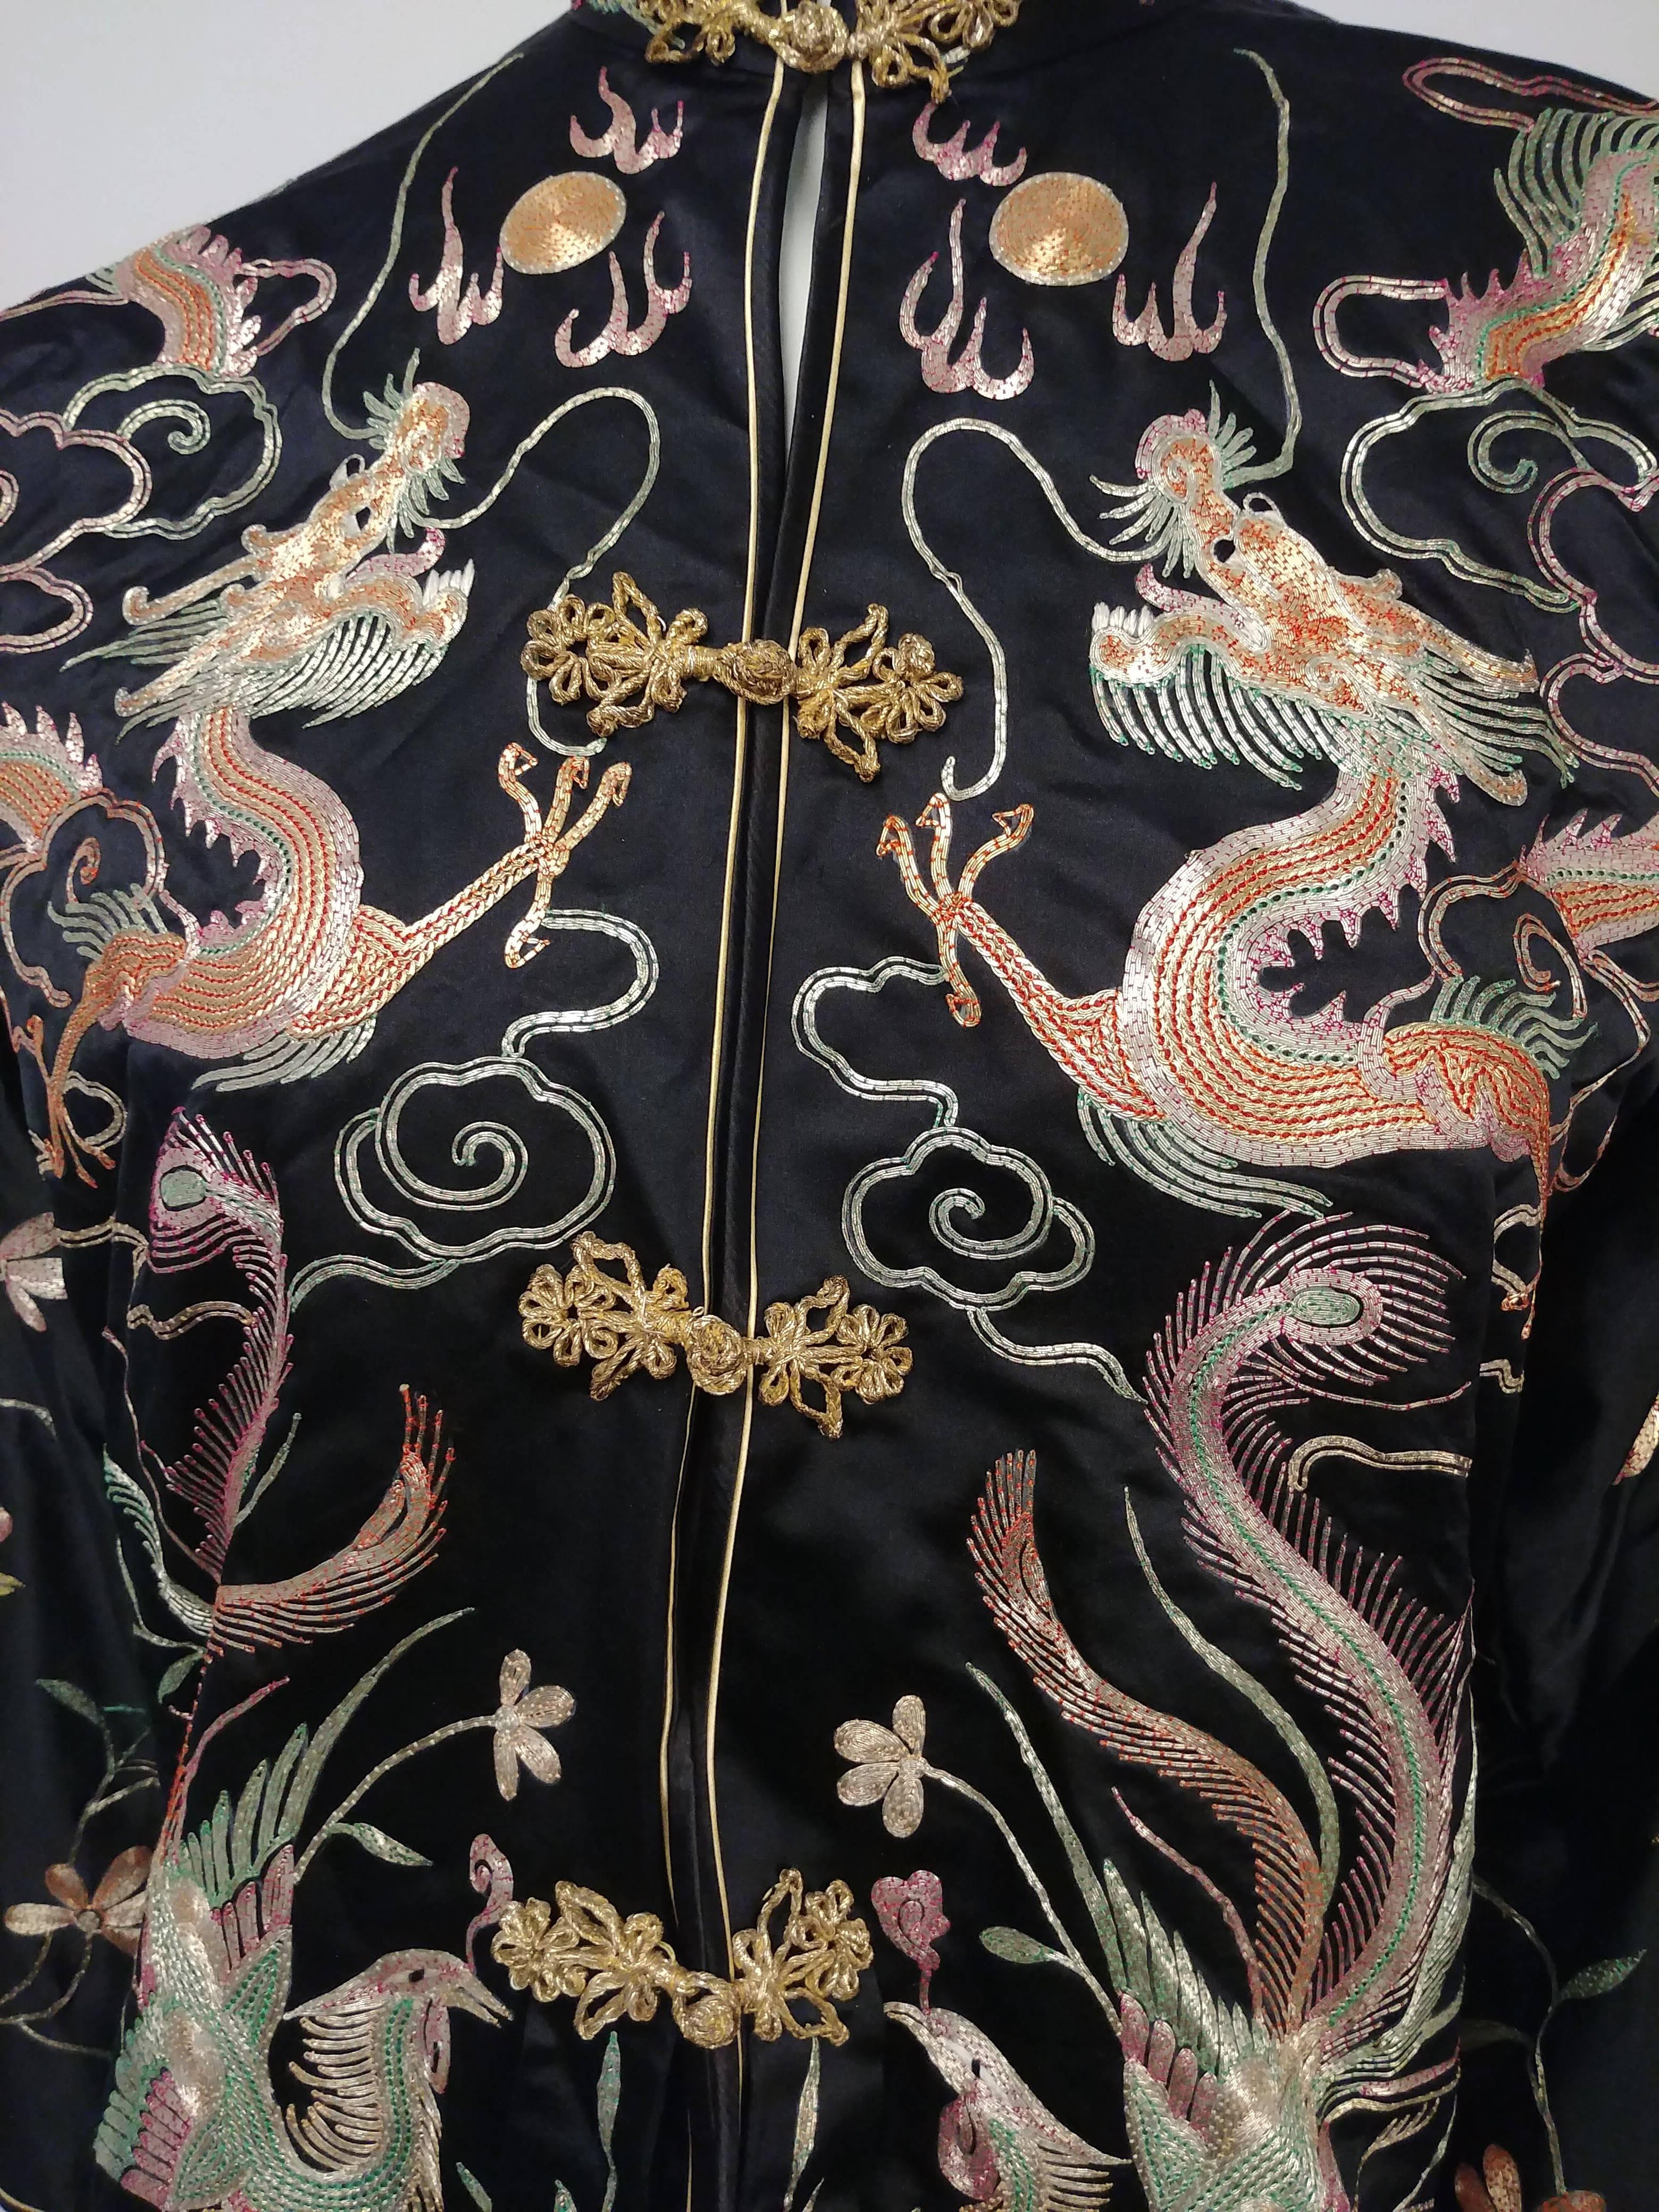 1940s Black Silk Chinese Top w/ Metallic Embroidery. Metallic frog closures. Dragon & phoenix motifs. Completely lined.